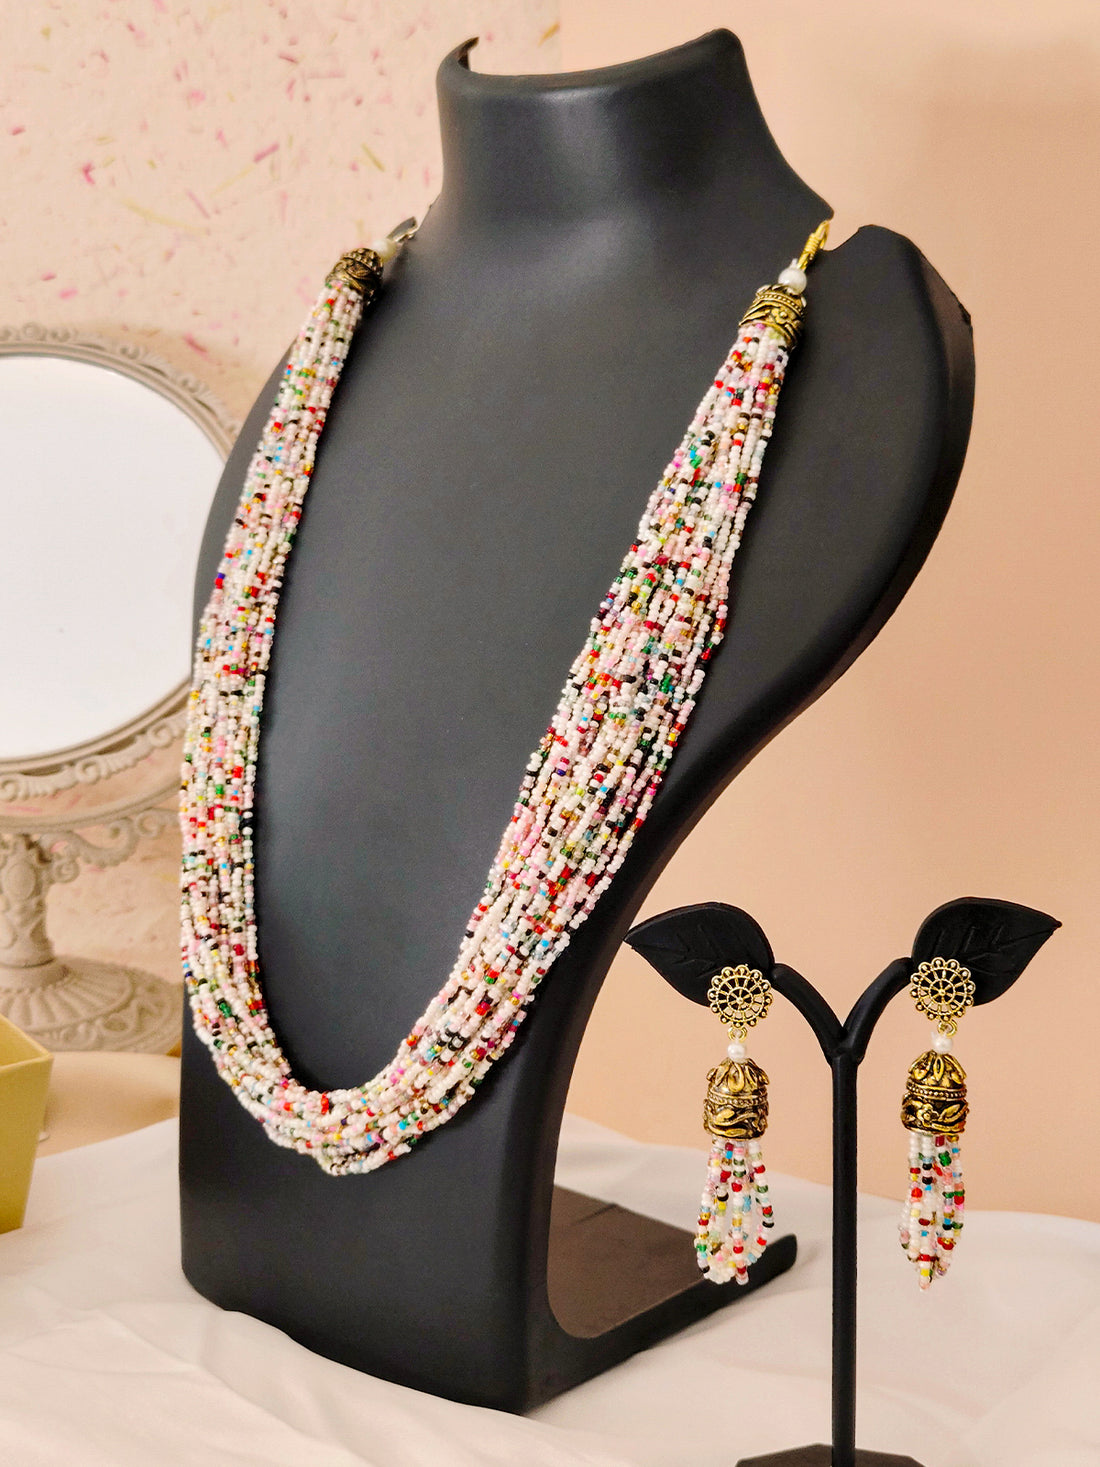 Moti Jhalar Necklace Set | Multi-colour Beads Necklace & Earrings for Parties & Office Going Women from House of Mrigaya by Nandini – Multi - Mrigaya India